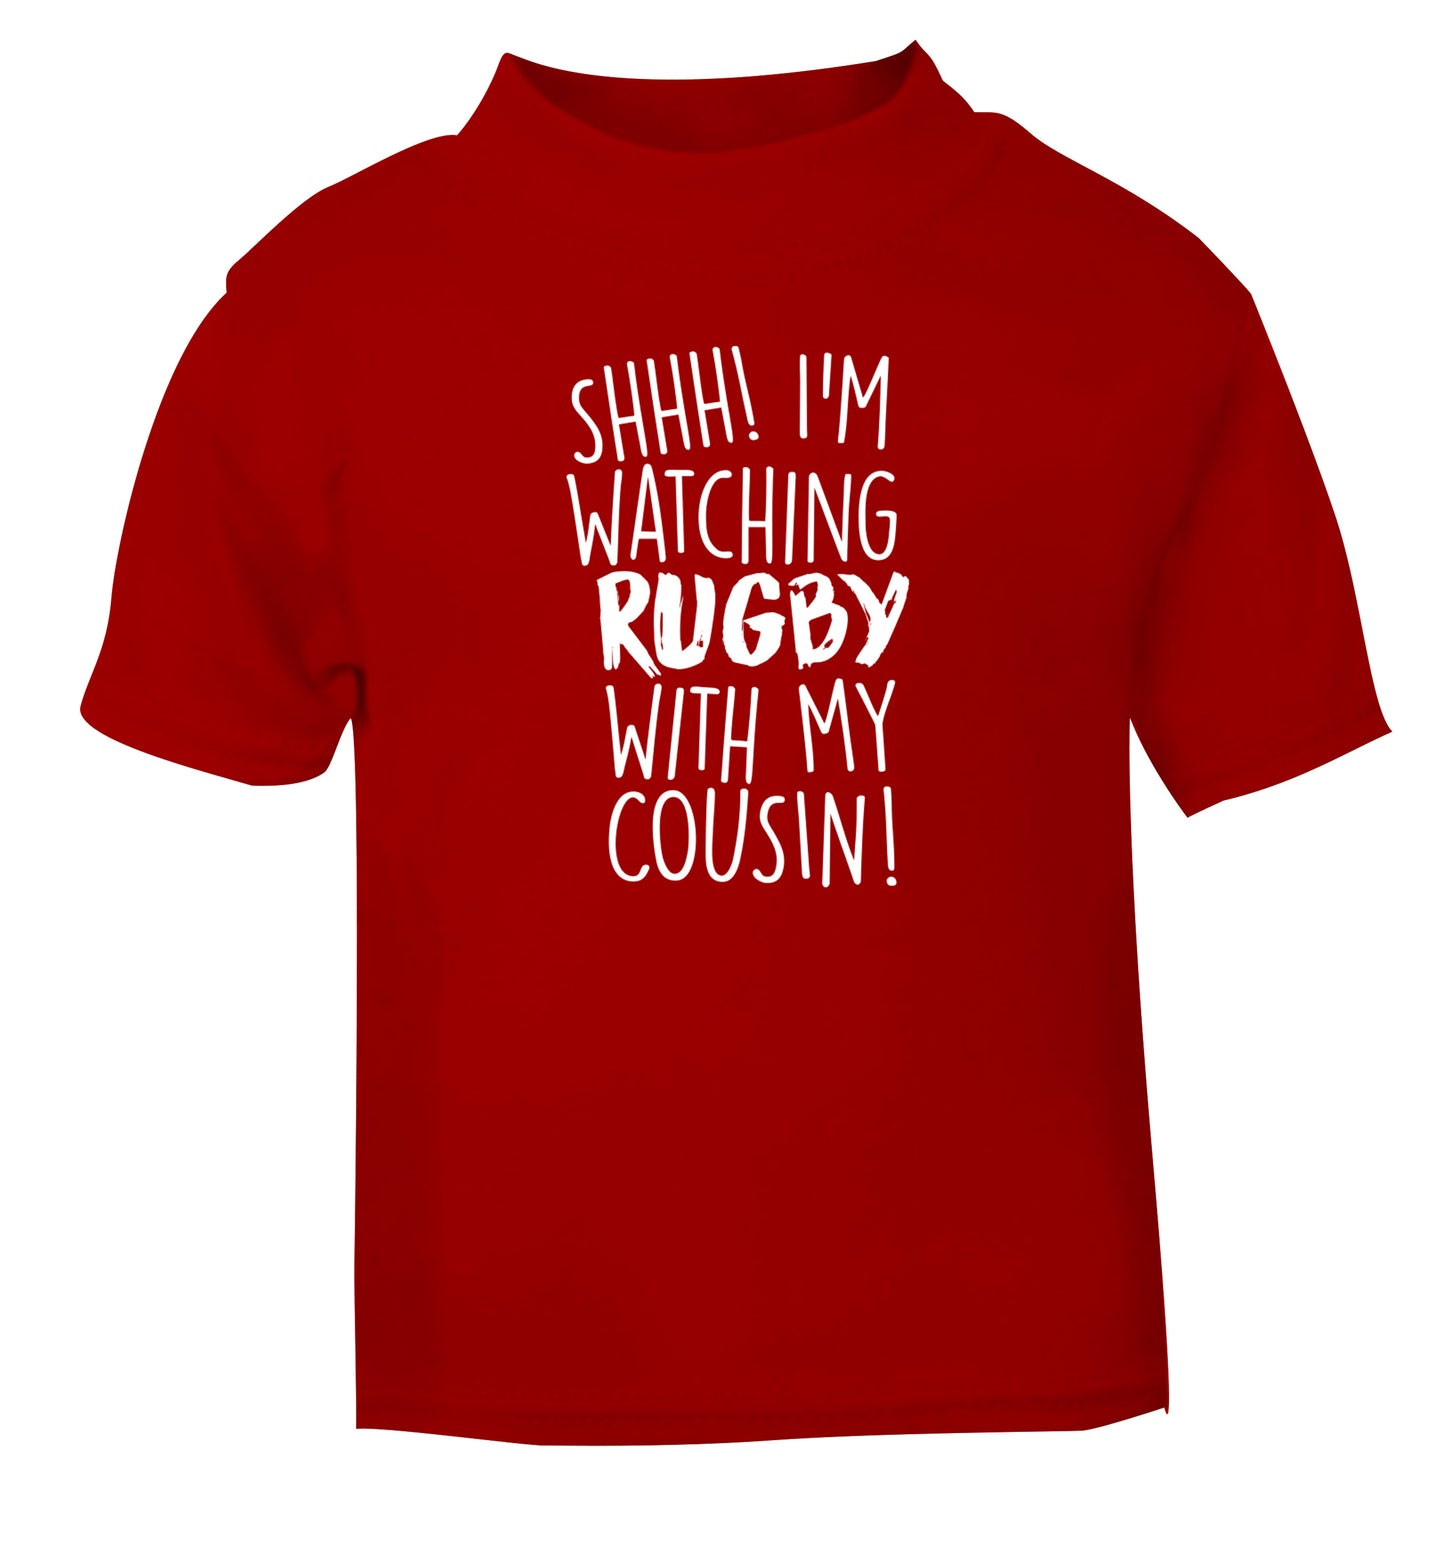 Shhh I'm watching rugby with my cousin red Baby Toddler Tshirt 2 Years